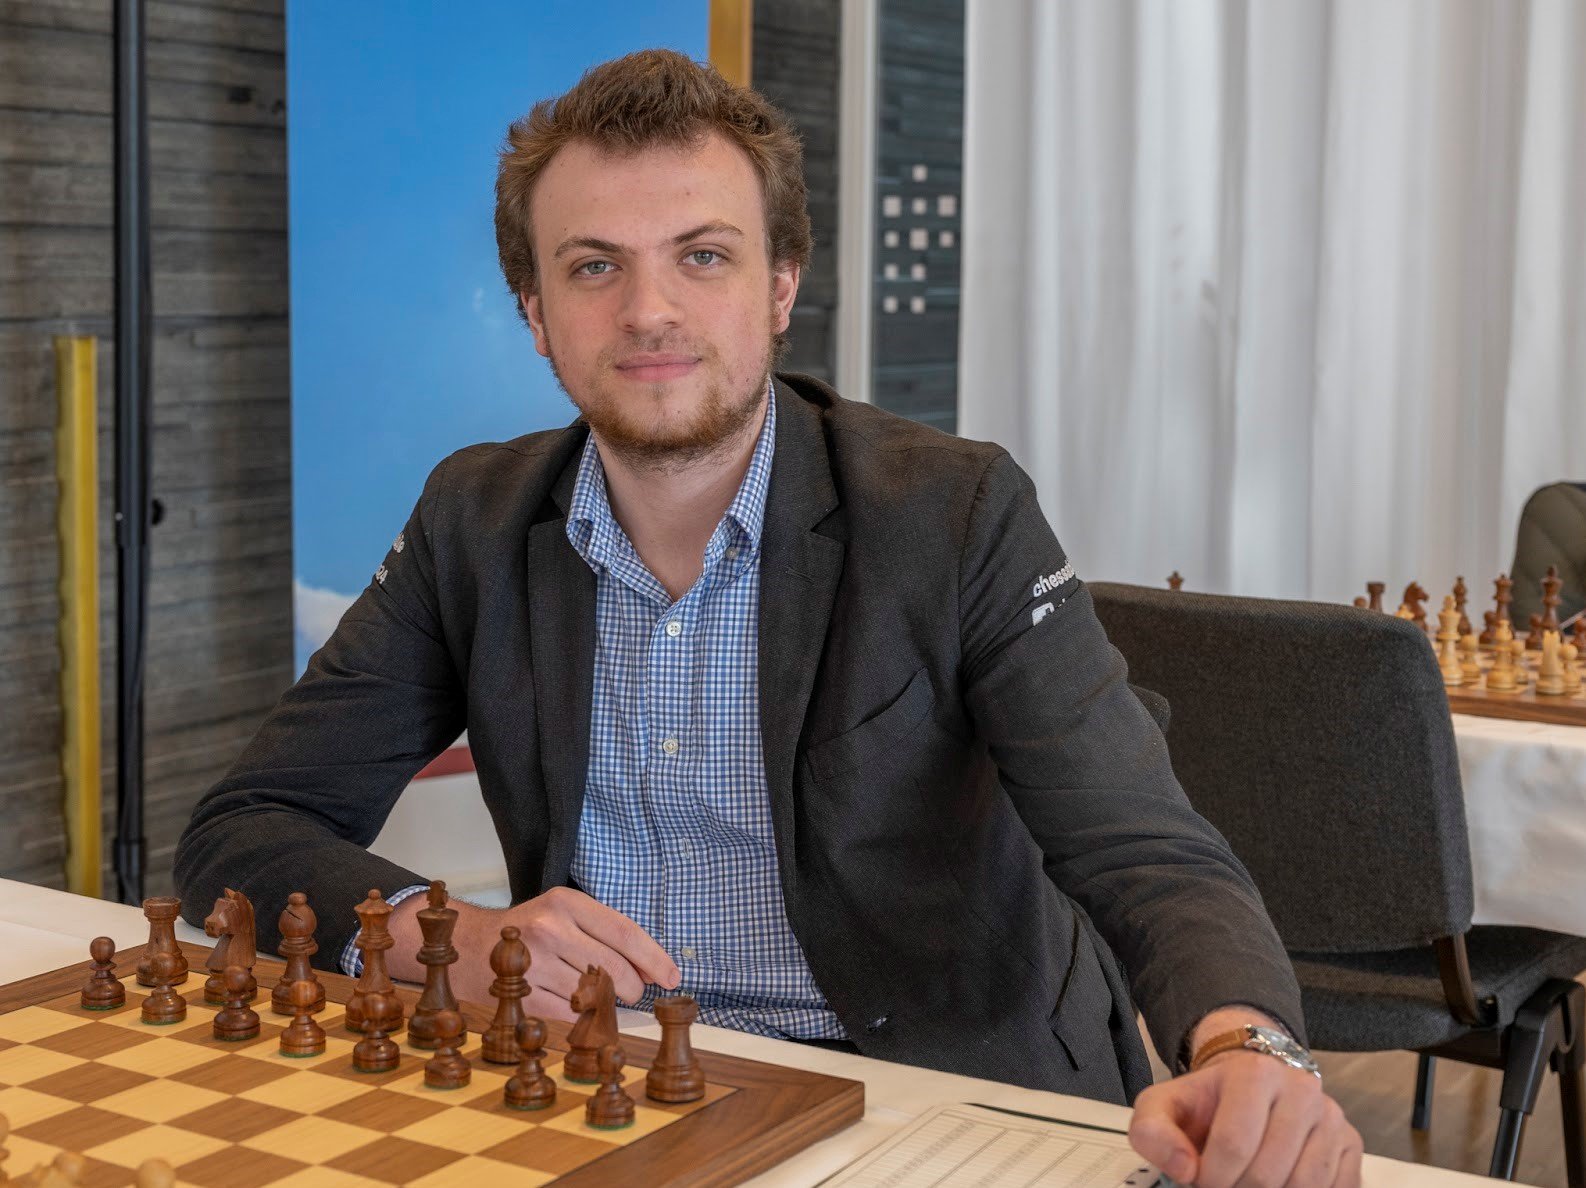 What Happened To Hans Niemann – Did The Grandmaster Admit To Cheating?